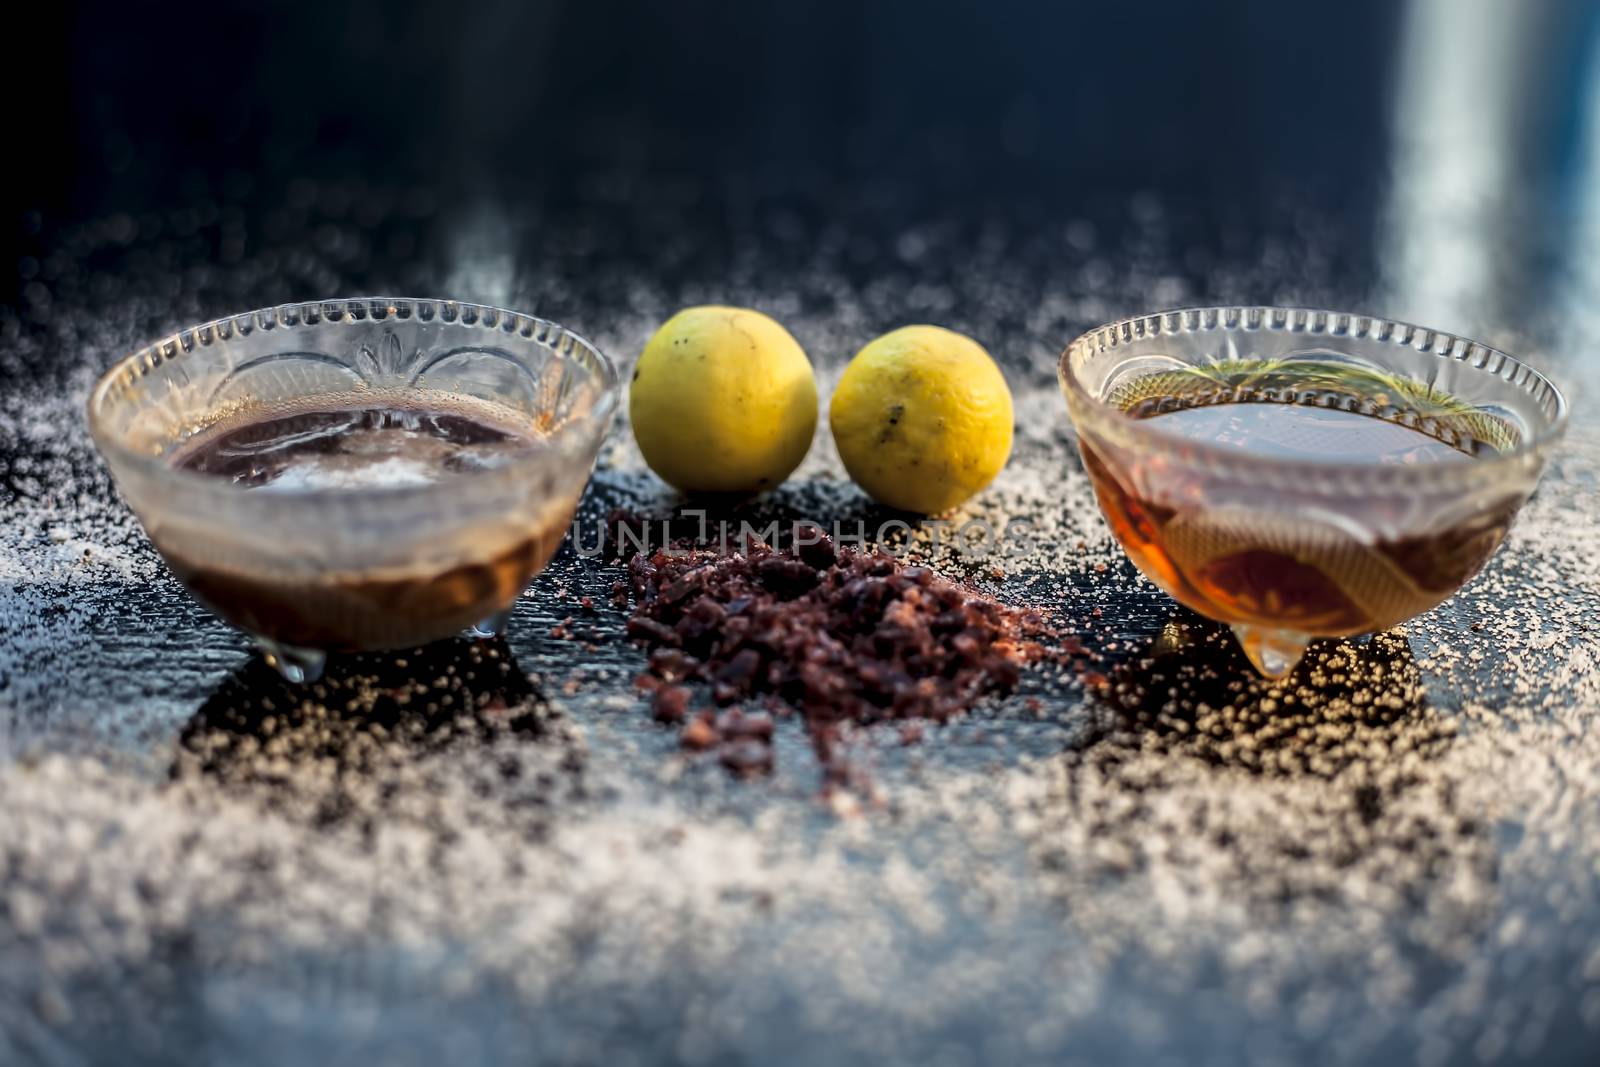 All-purpose ayurvedic salt face mask on the black wooden surface consisting of salt, rock salt, lemon juice, and honey. The face mask as well as a face pack. Horizontal shot. by mirzamlk